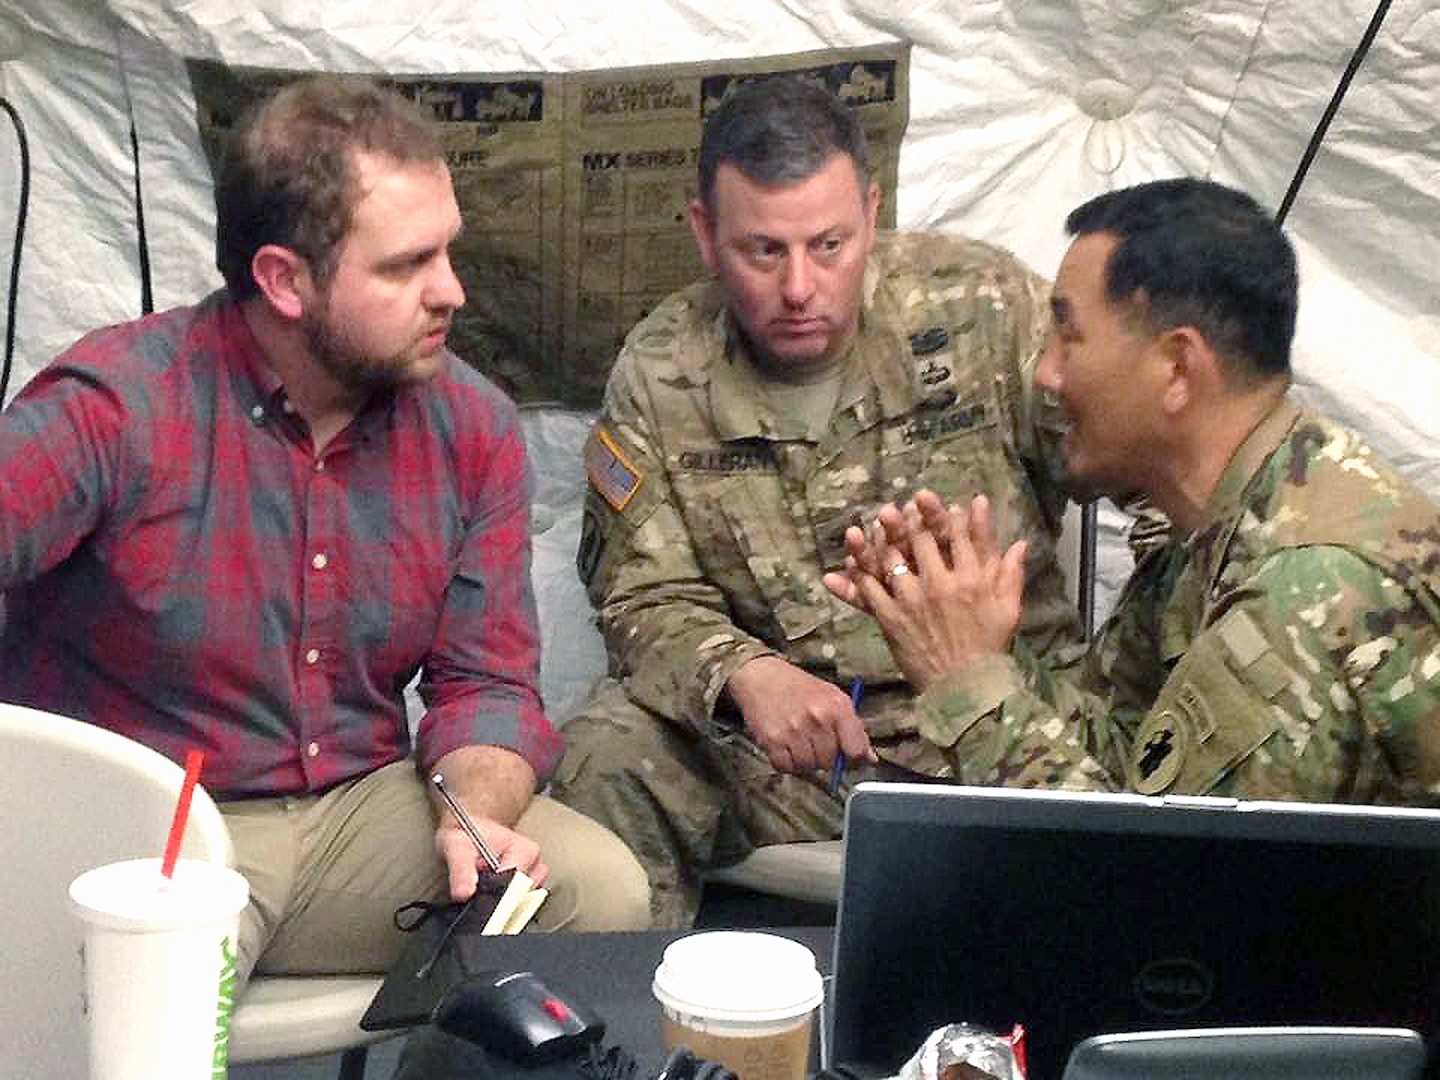 Maj. Gen. K.K. Chinn (right), U.S. Army South commanding general, speaks to Alex Horton (left), a Stars & Stripes reporter, as Col. Thomas Gilleran (center), the Army South public affairs officer, listens Aug. 3 at Fort Sam Houston. The interview was part of a media day for the Multi-National Forces-South component of the annual PANAMAX exercise.